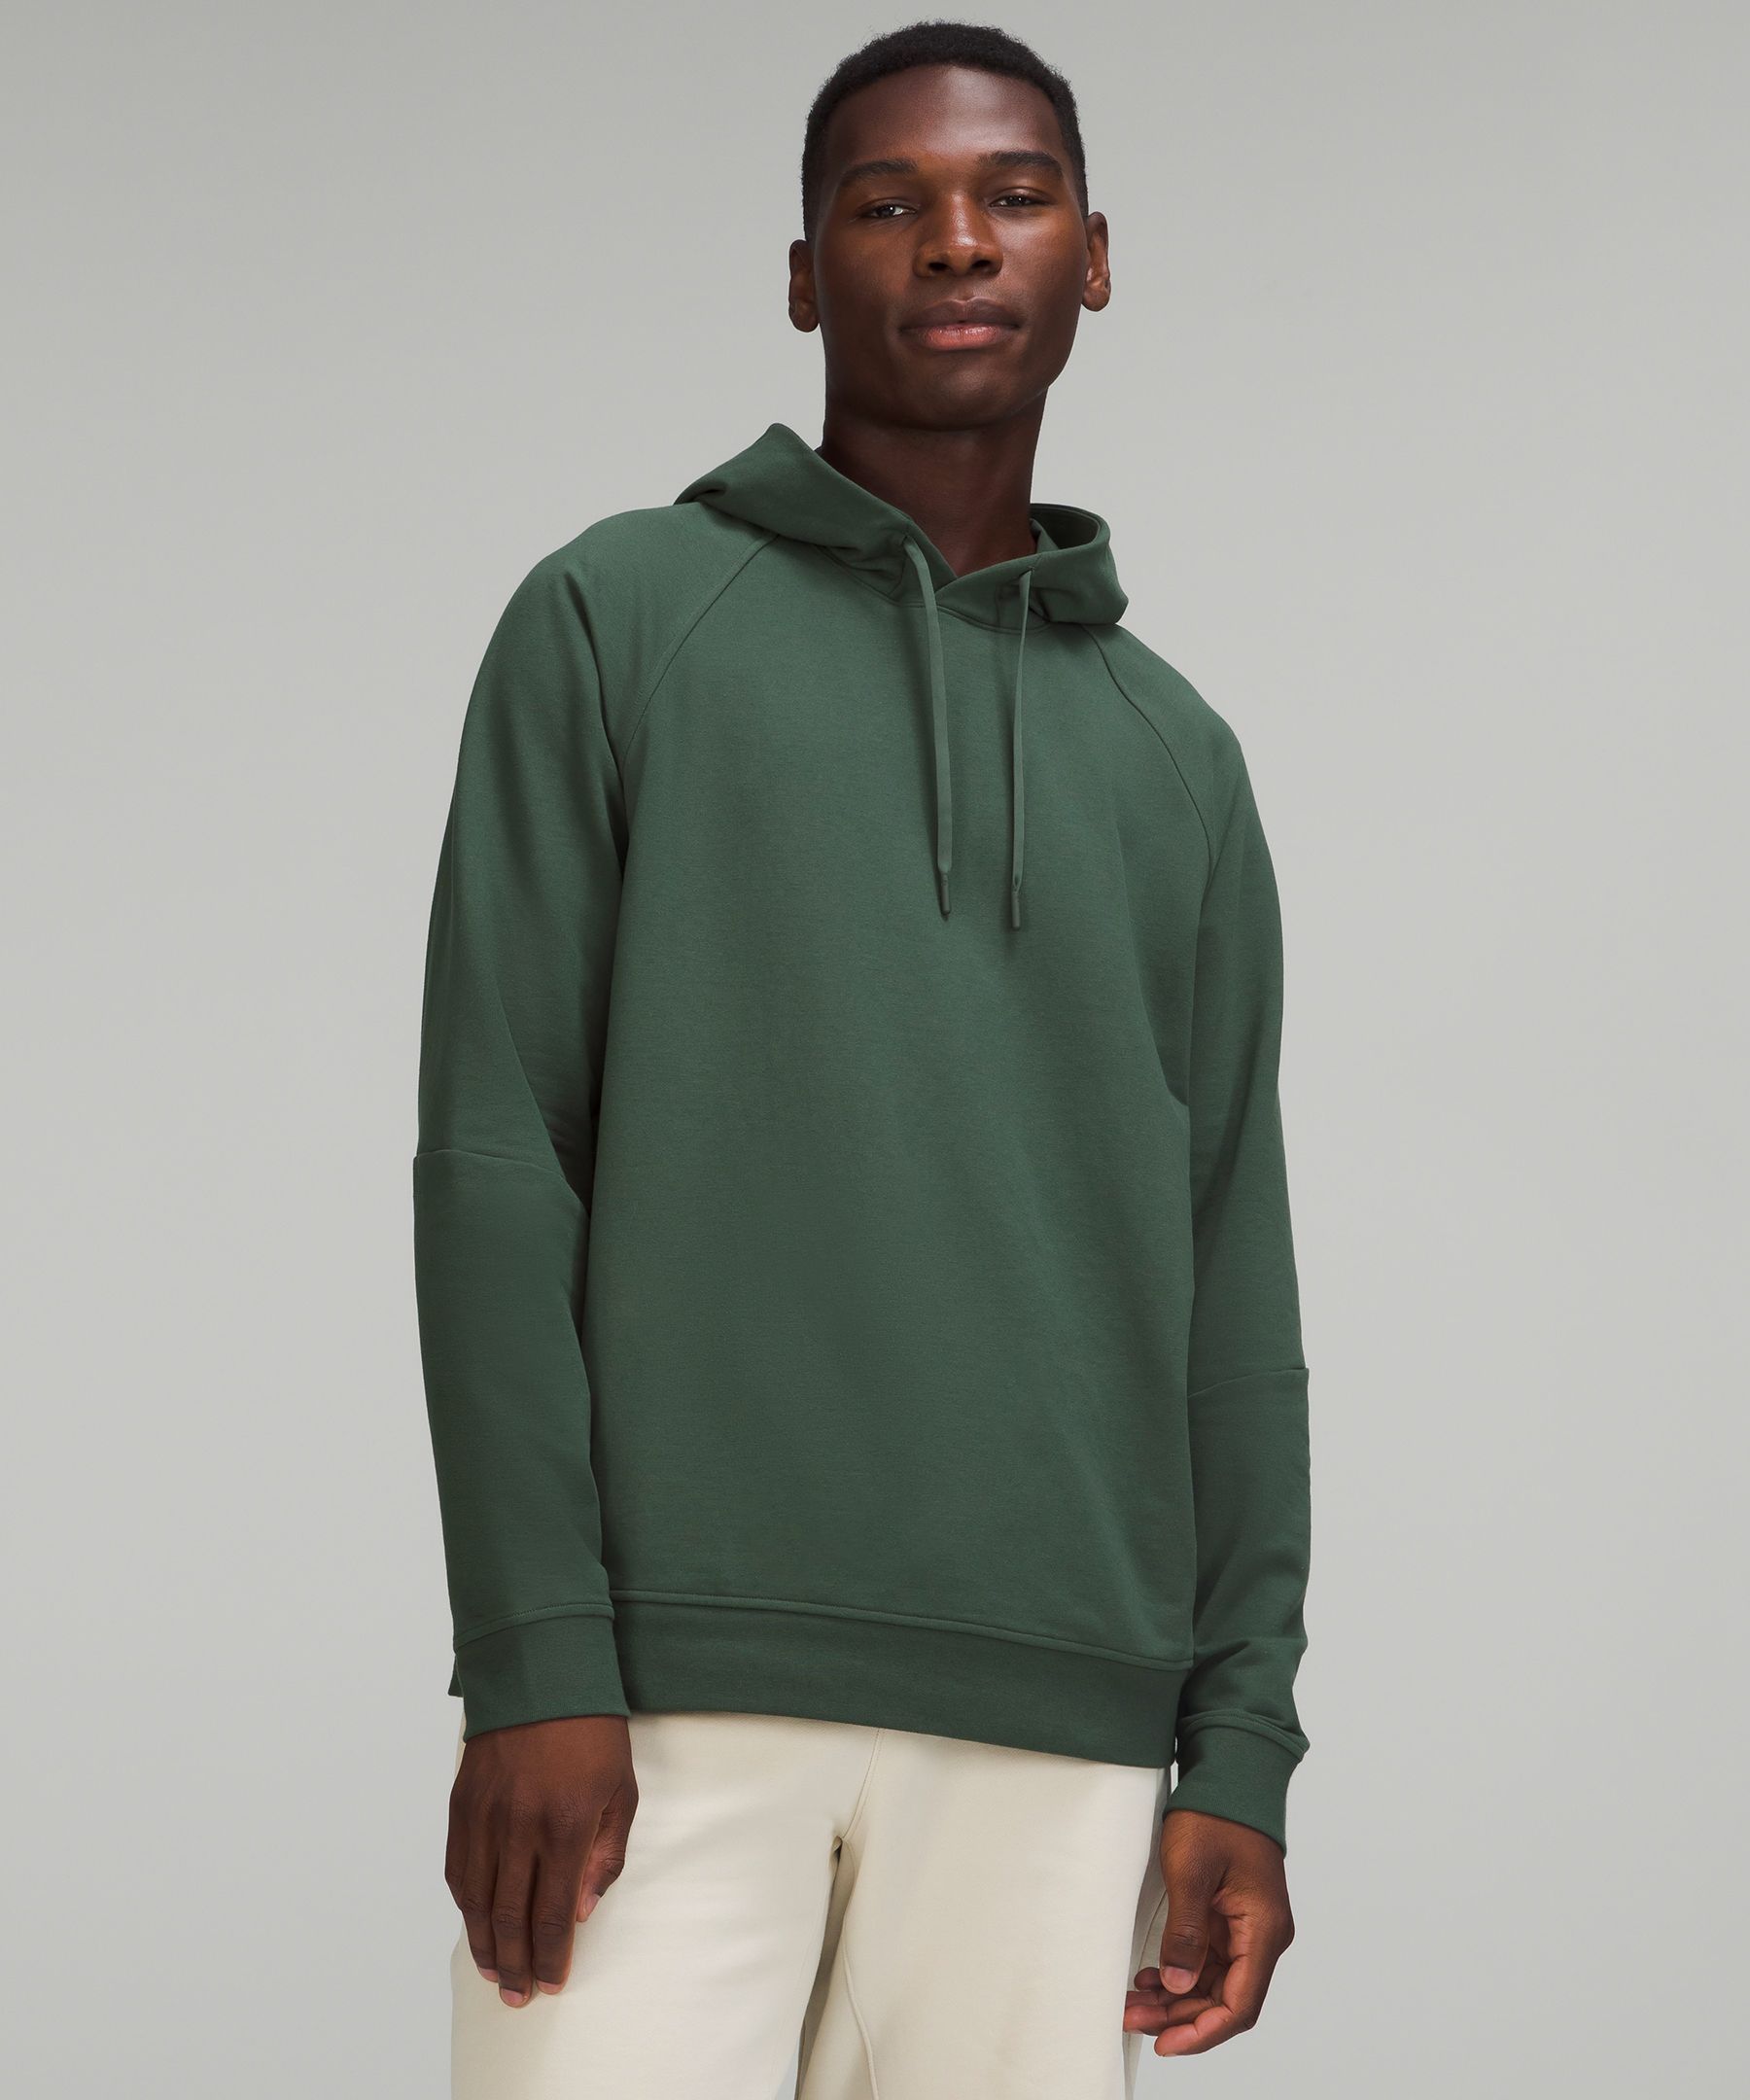 Lululemon City Sweat Pullover Hoodie In Smoked Spruce